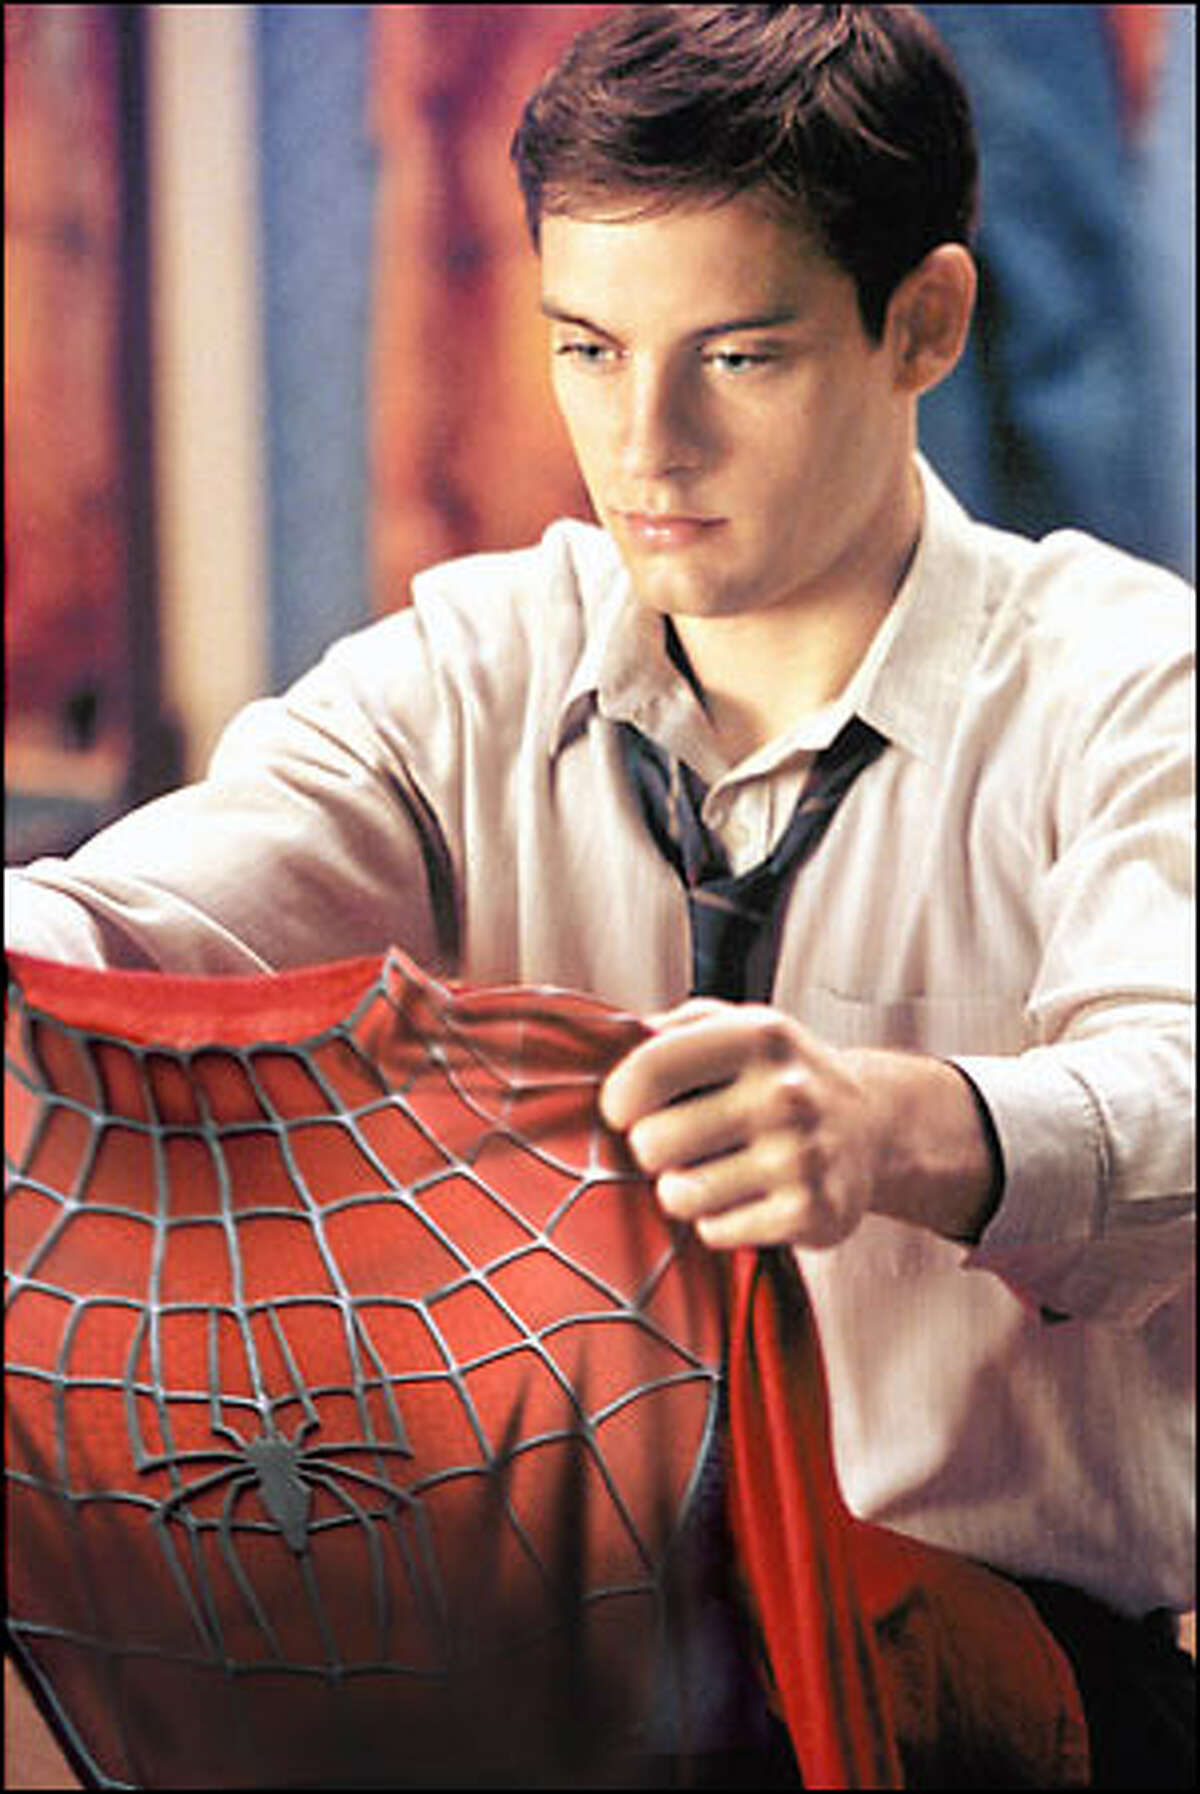 "With great power there must also come great responsibility," as Peter Parker (Tobey Maguire) learns.